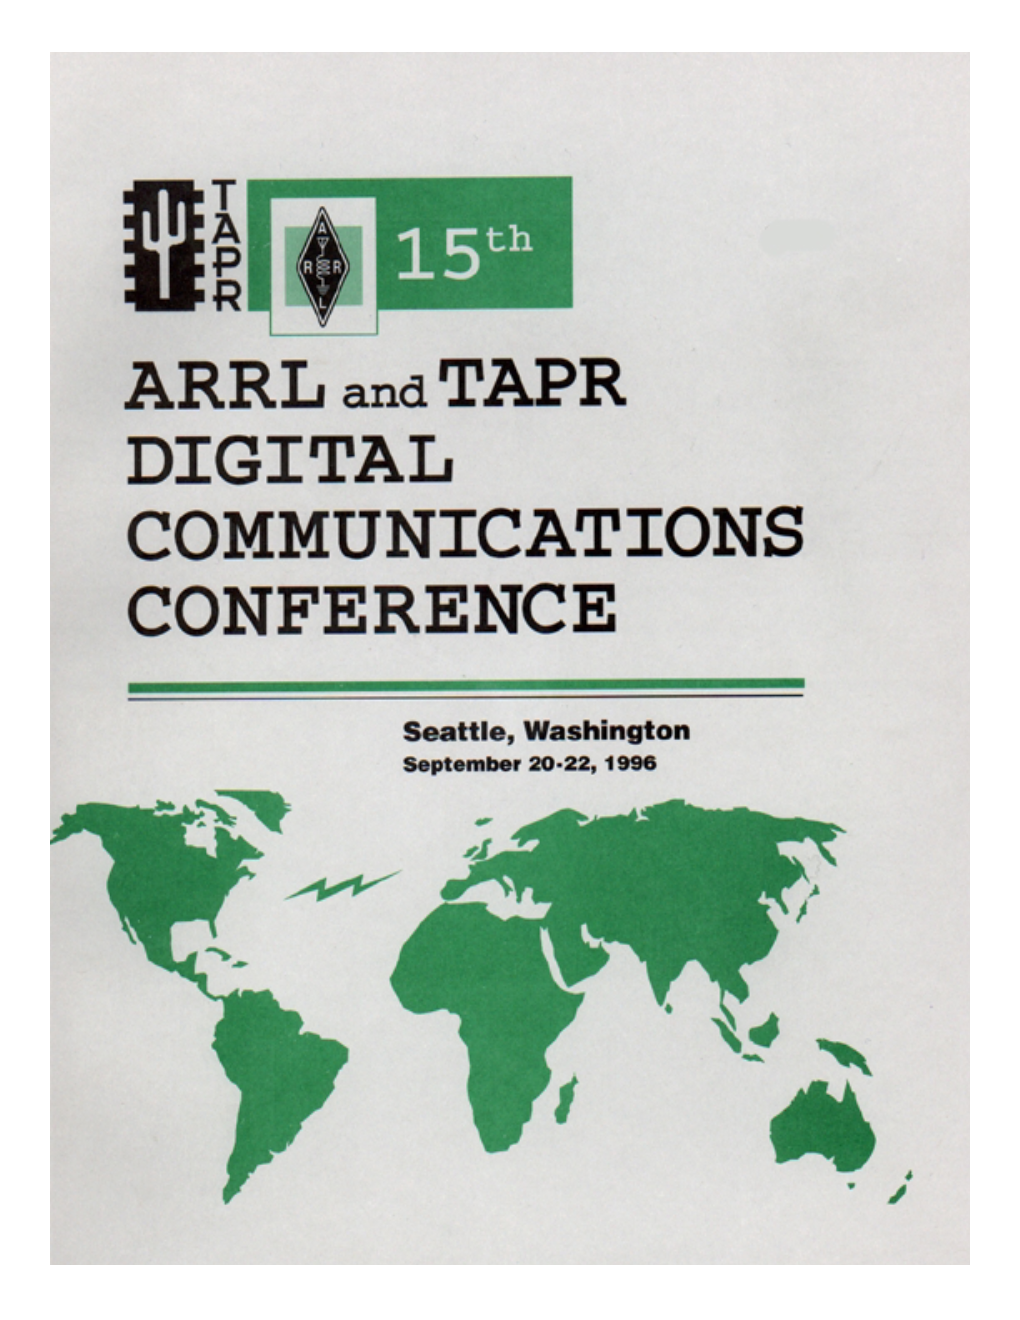 History of APRS 1992 APRSTM Was First Introduced by Bob Bruninga, WB4APR, in the Fall of 1992 at the ARRL Computer Networking Conference in Teaneck, New Jersey